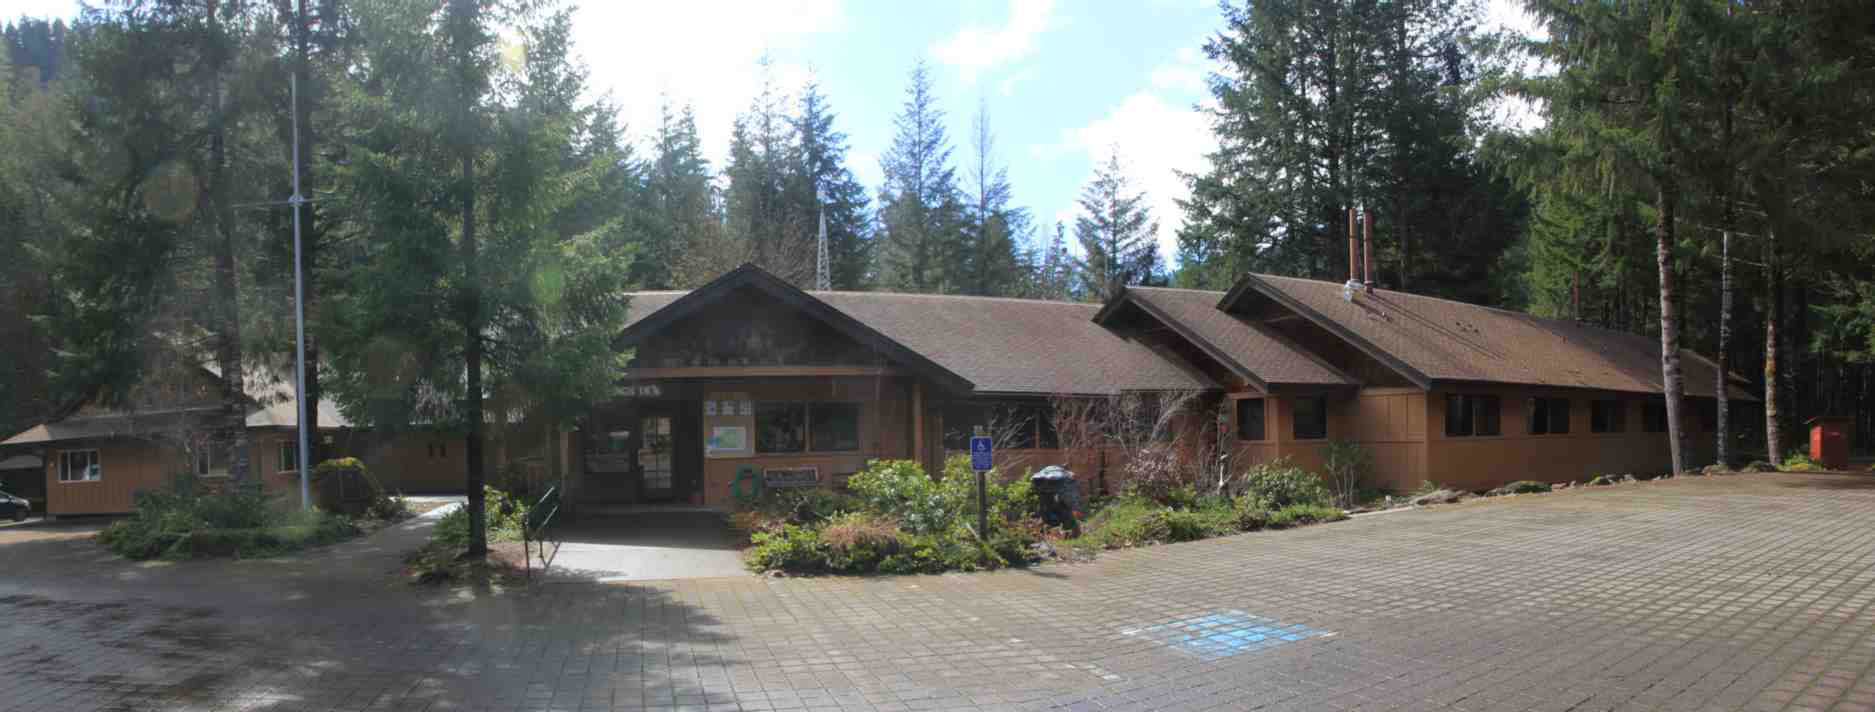 Andrews Forest headquarters